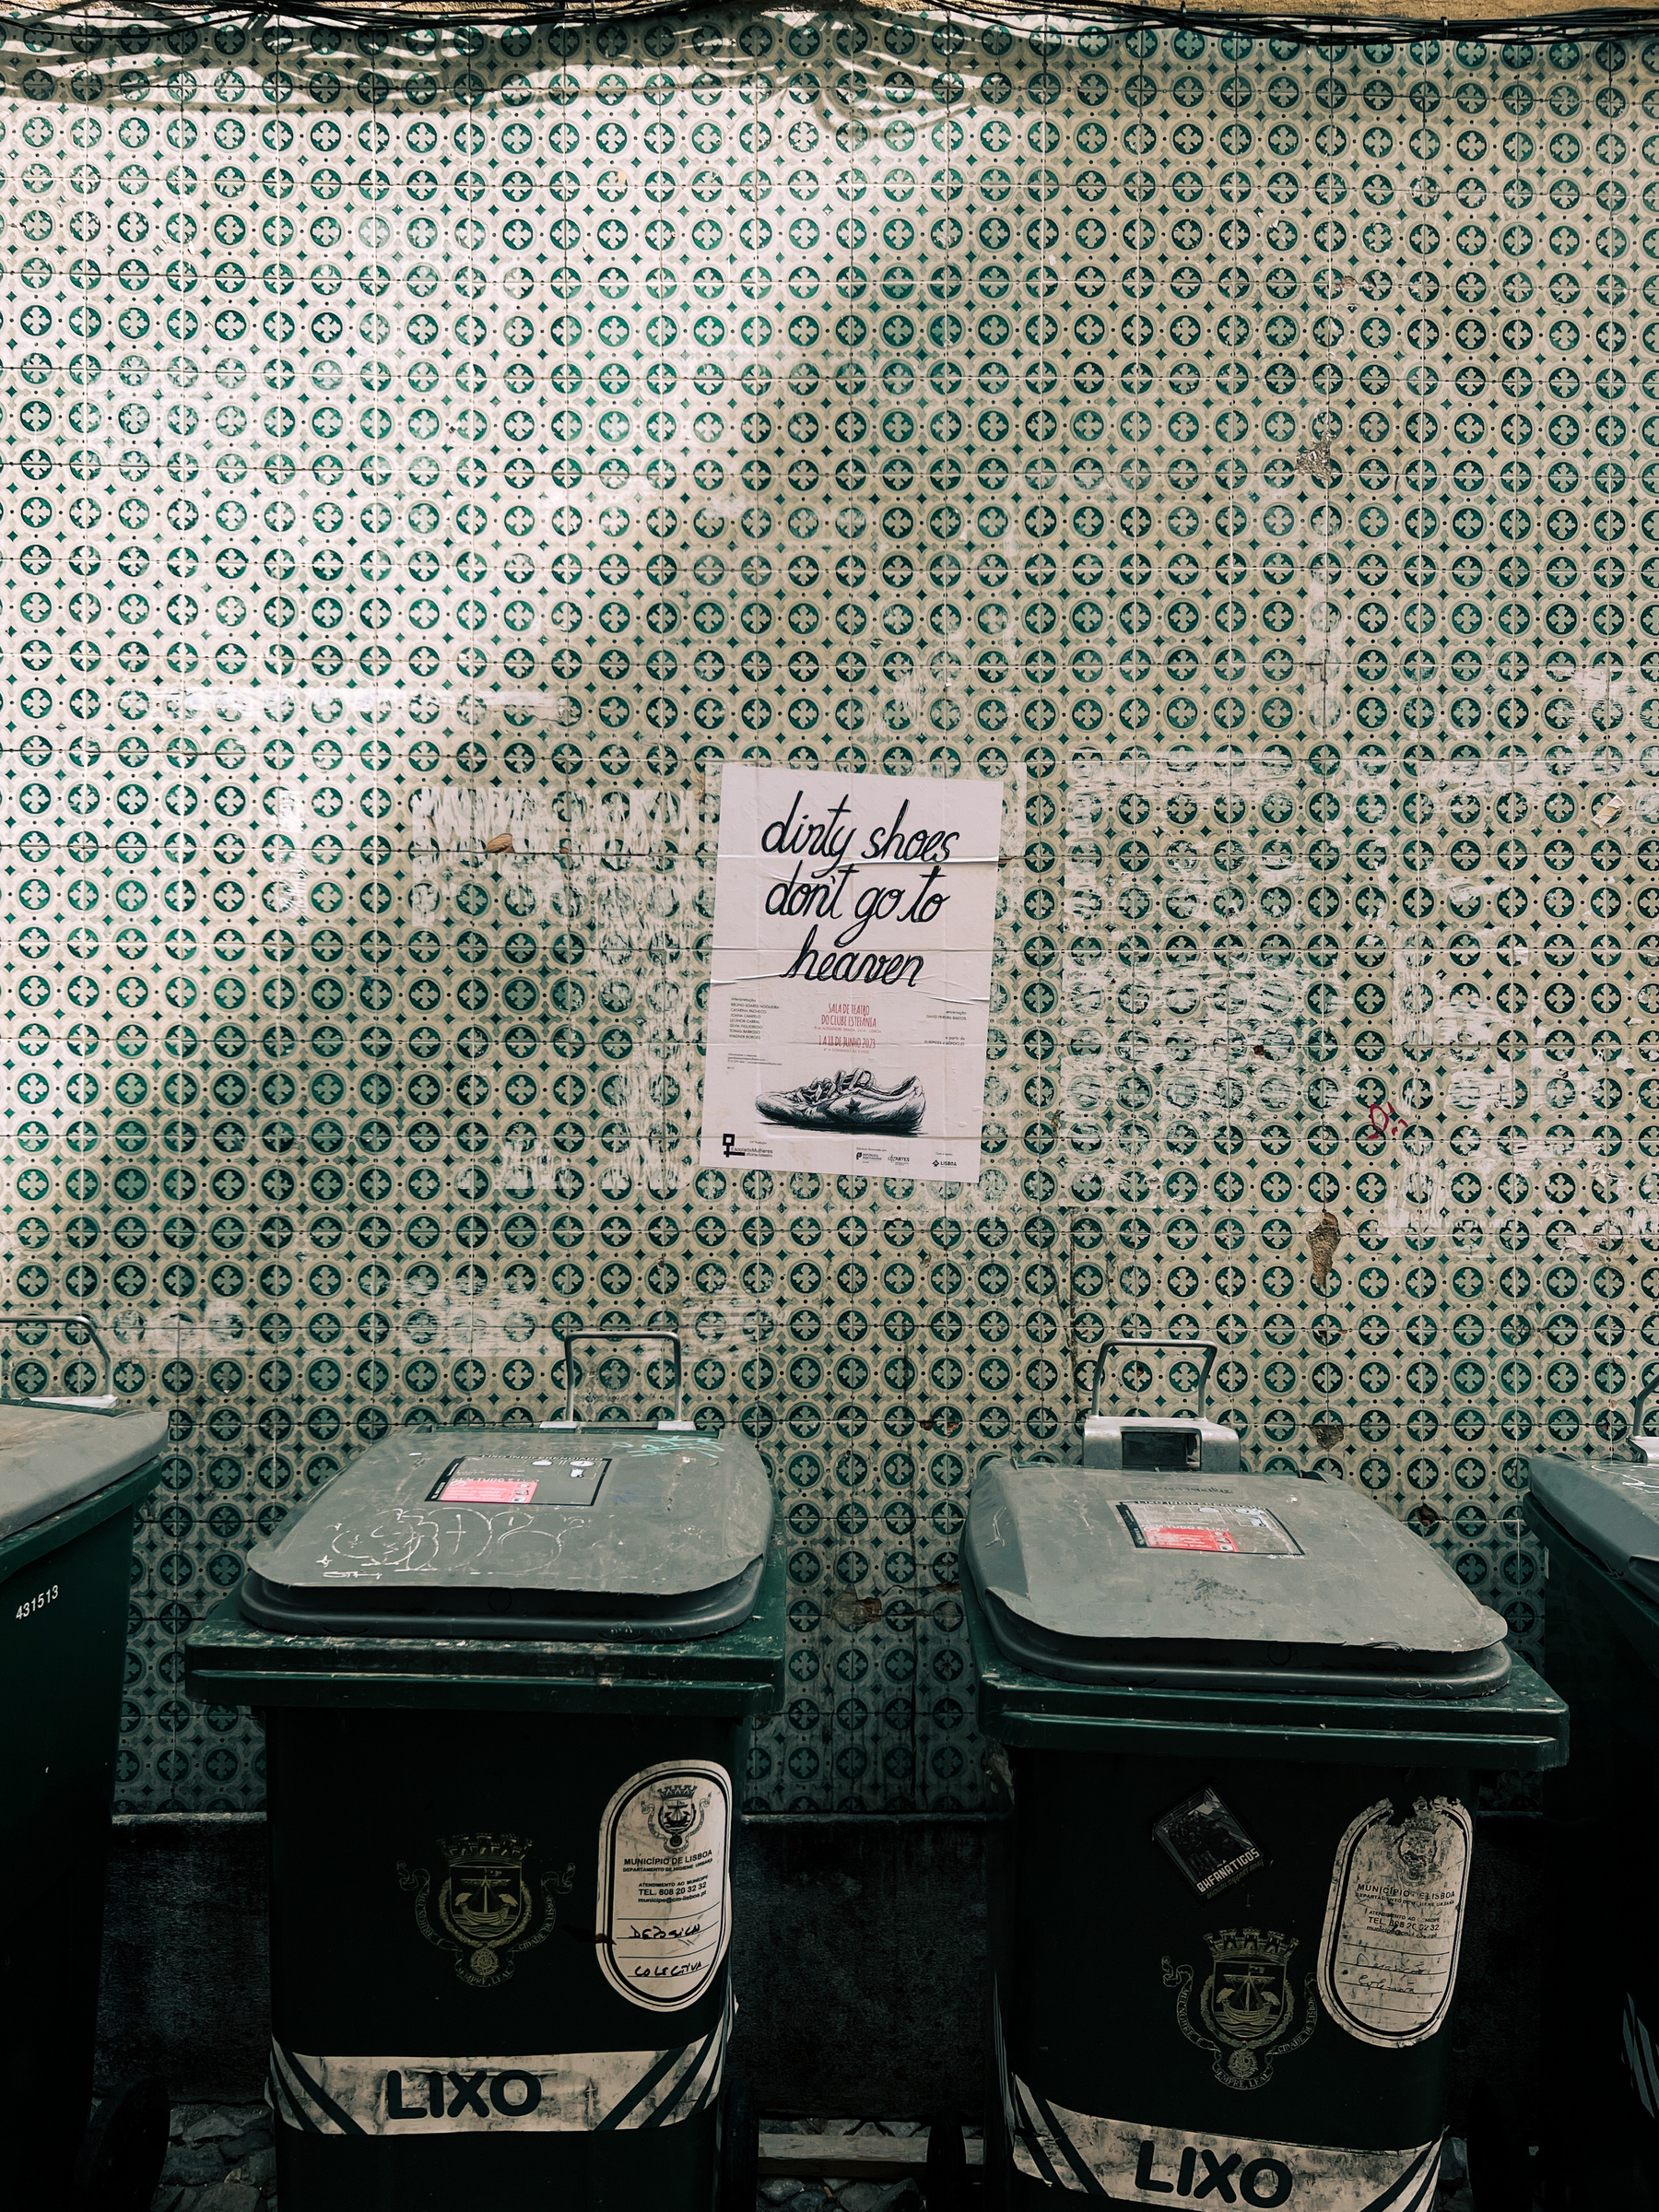 “dirty shoes don’t go to heaven”, on a poster, on a tile wall, over a couple of trash cans. 